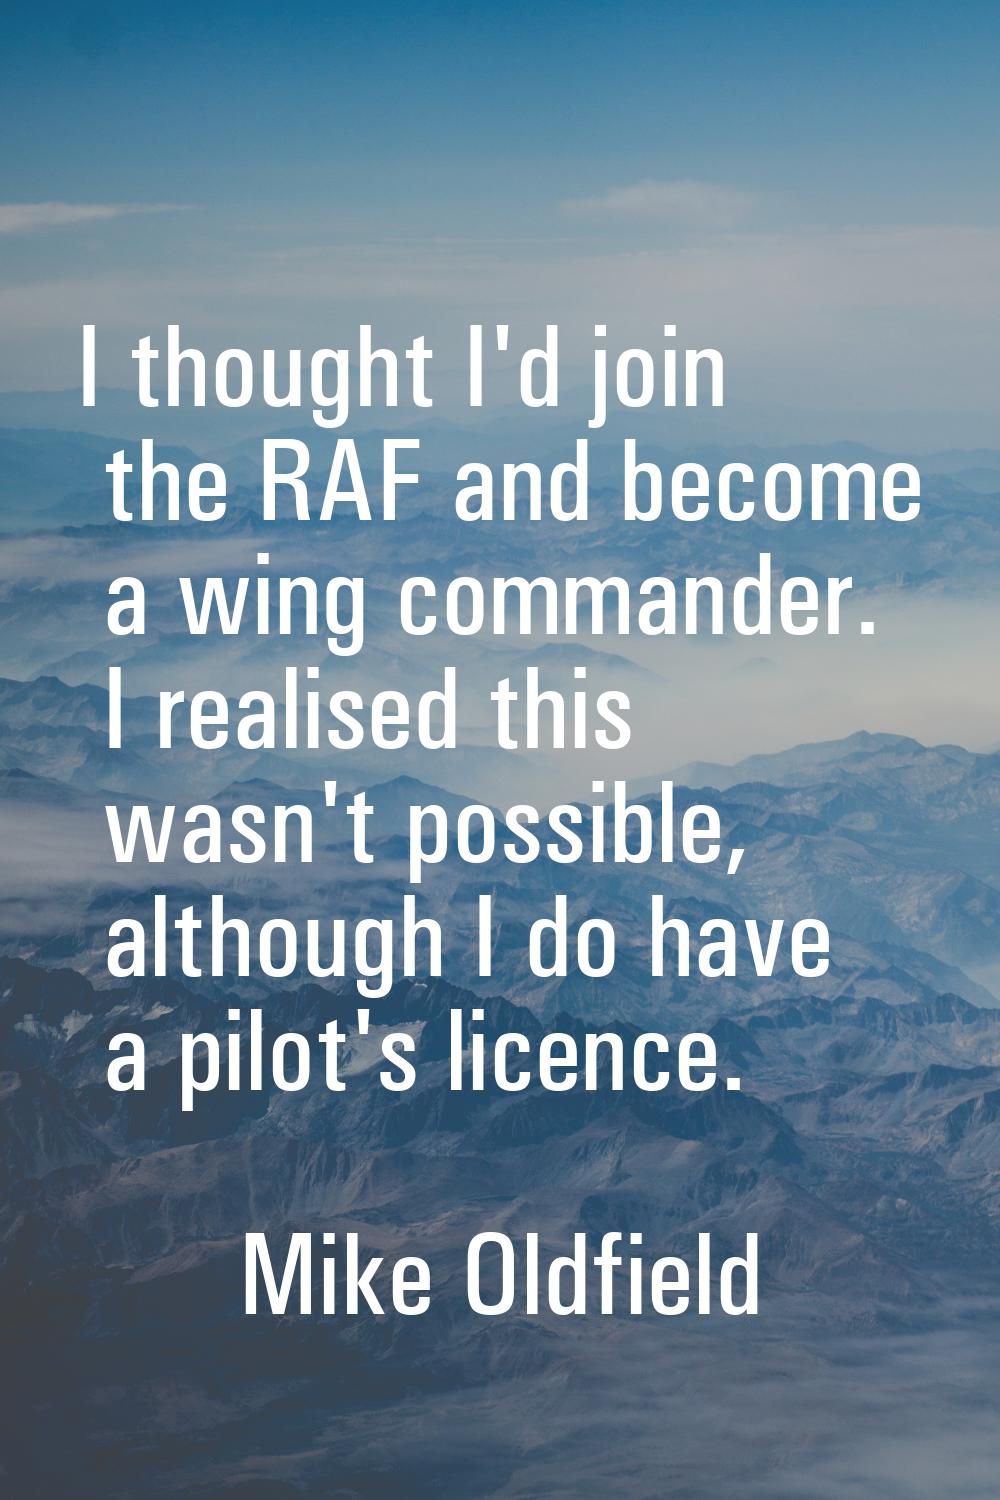 I thought I'd join the RAF and become a wing commander. I realised this wasn't possible, although I